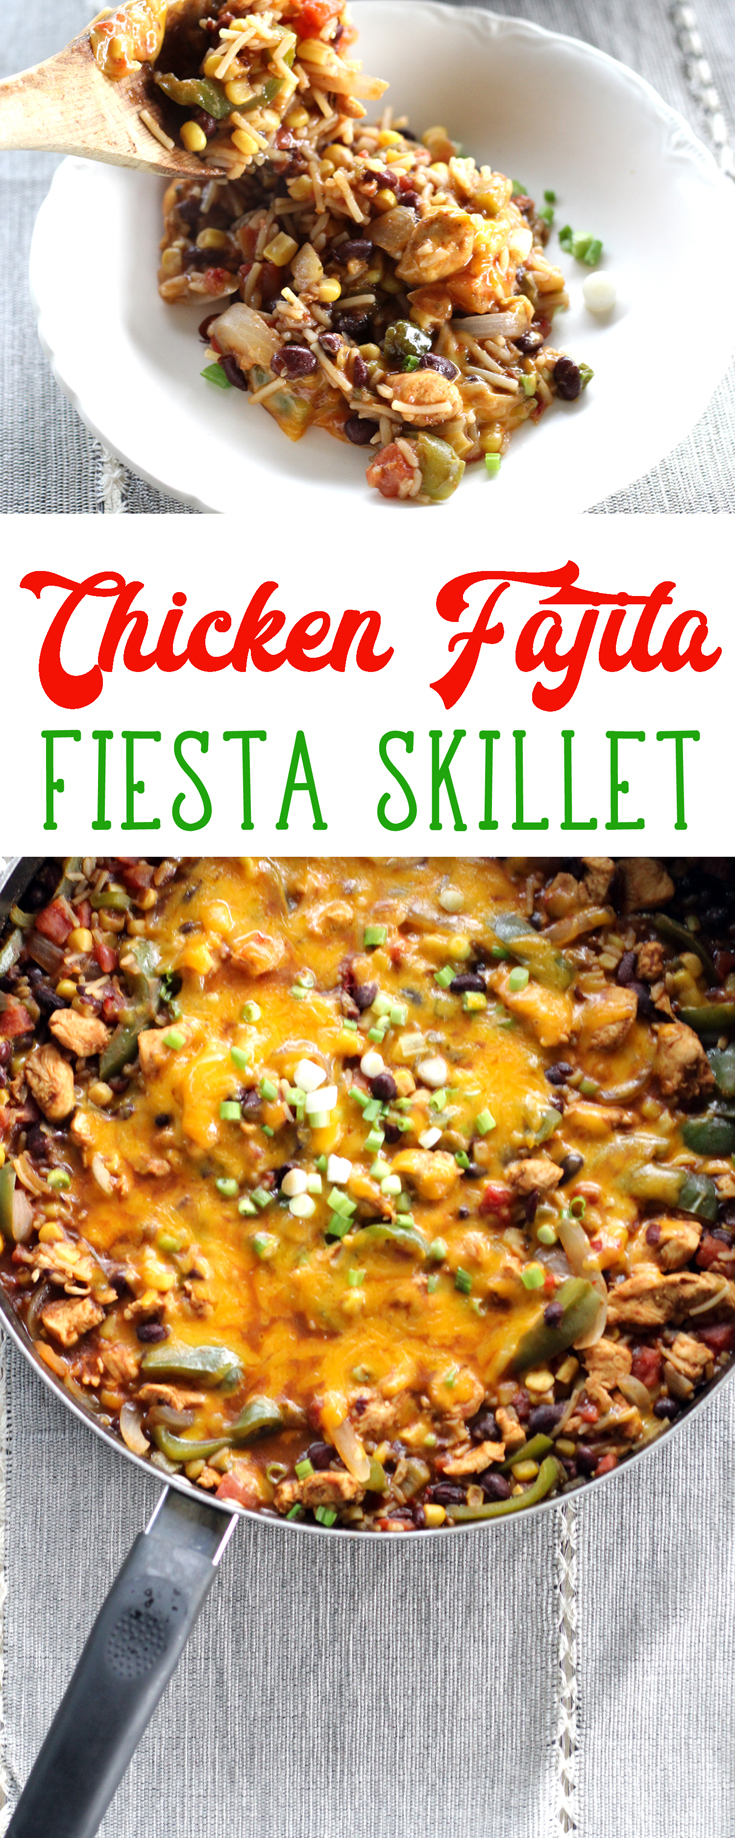 What's not to love about this Chicken Fajita Fiesta Skillet recipe? Tender chicken combined with peppers, onions, black beans, corn, and Mexican rice.